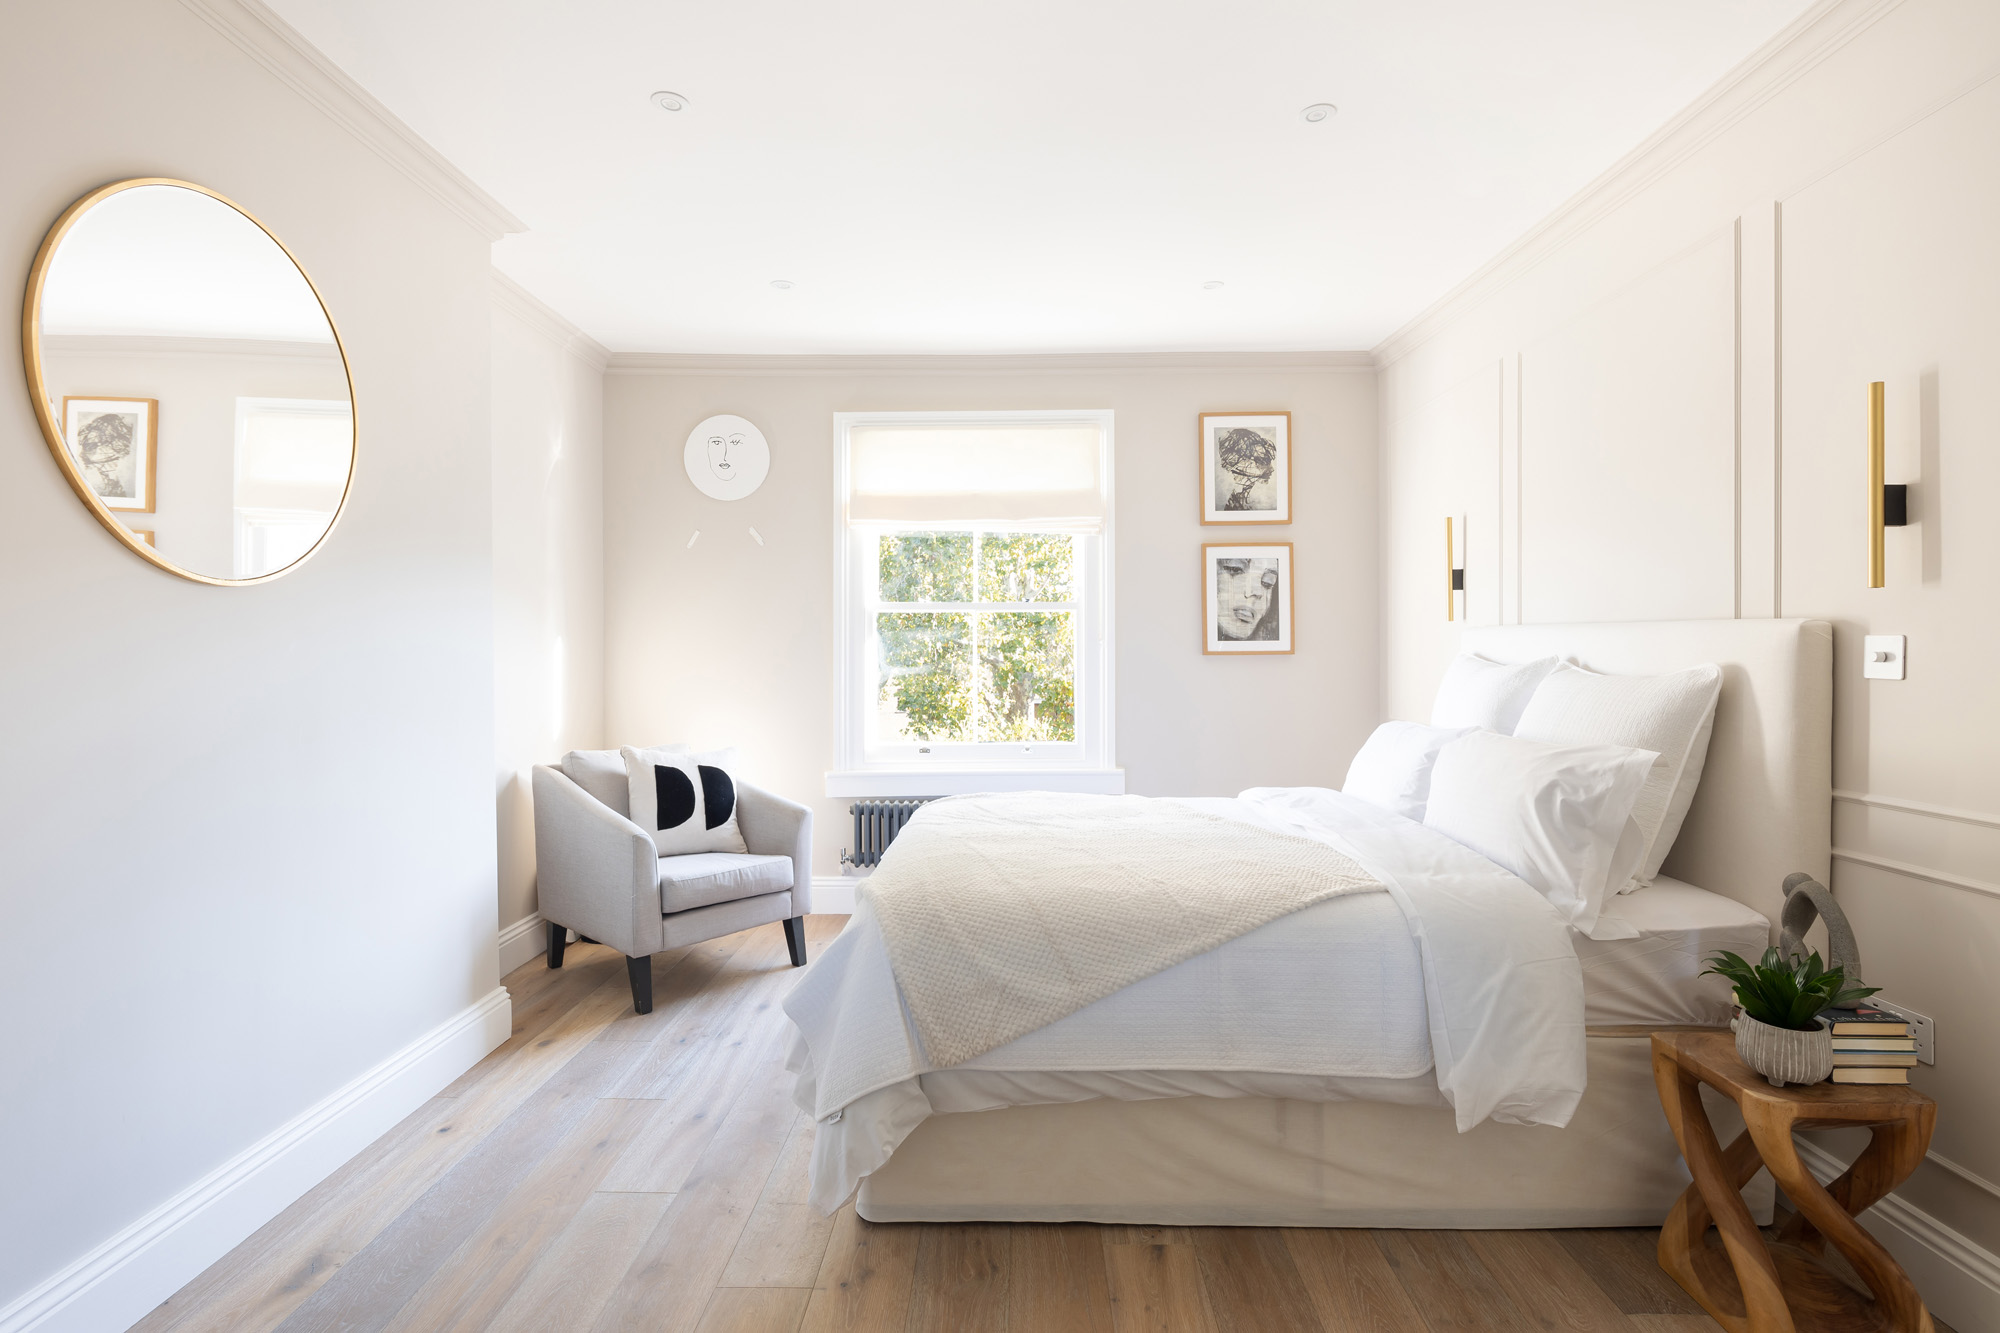 For Sale: St Lawrence Terrace Notting Hill W11luxury master bedroom with contemporary interior decor